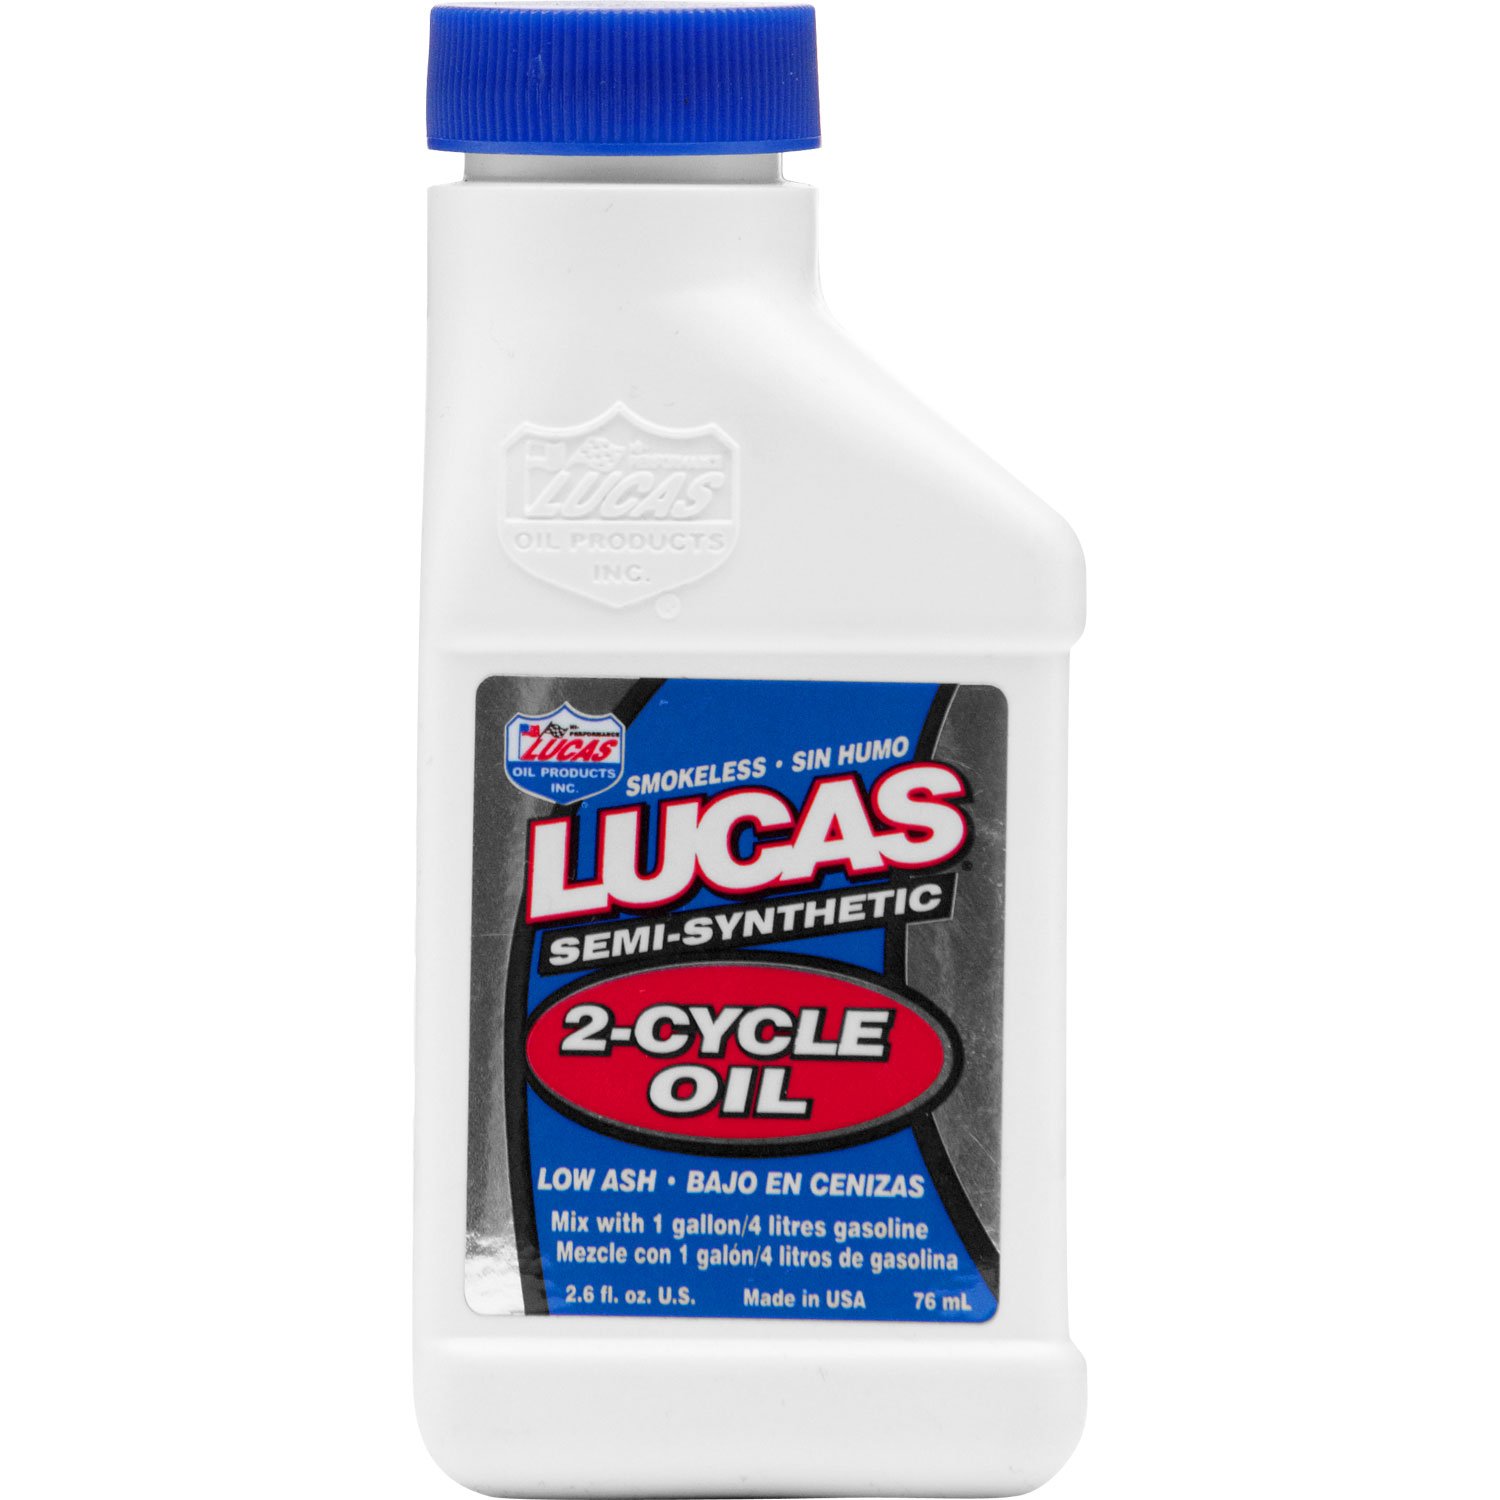 Semi-Synthetic 2-Cycle High-Temp Racing Oil 2.6 oz Bottle